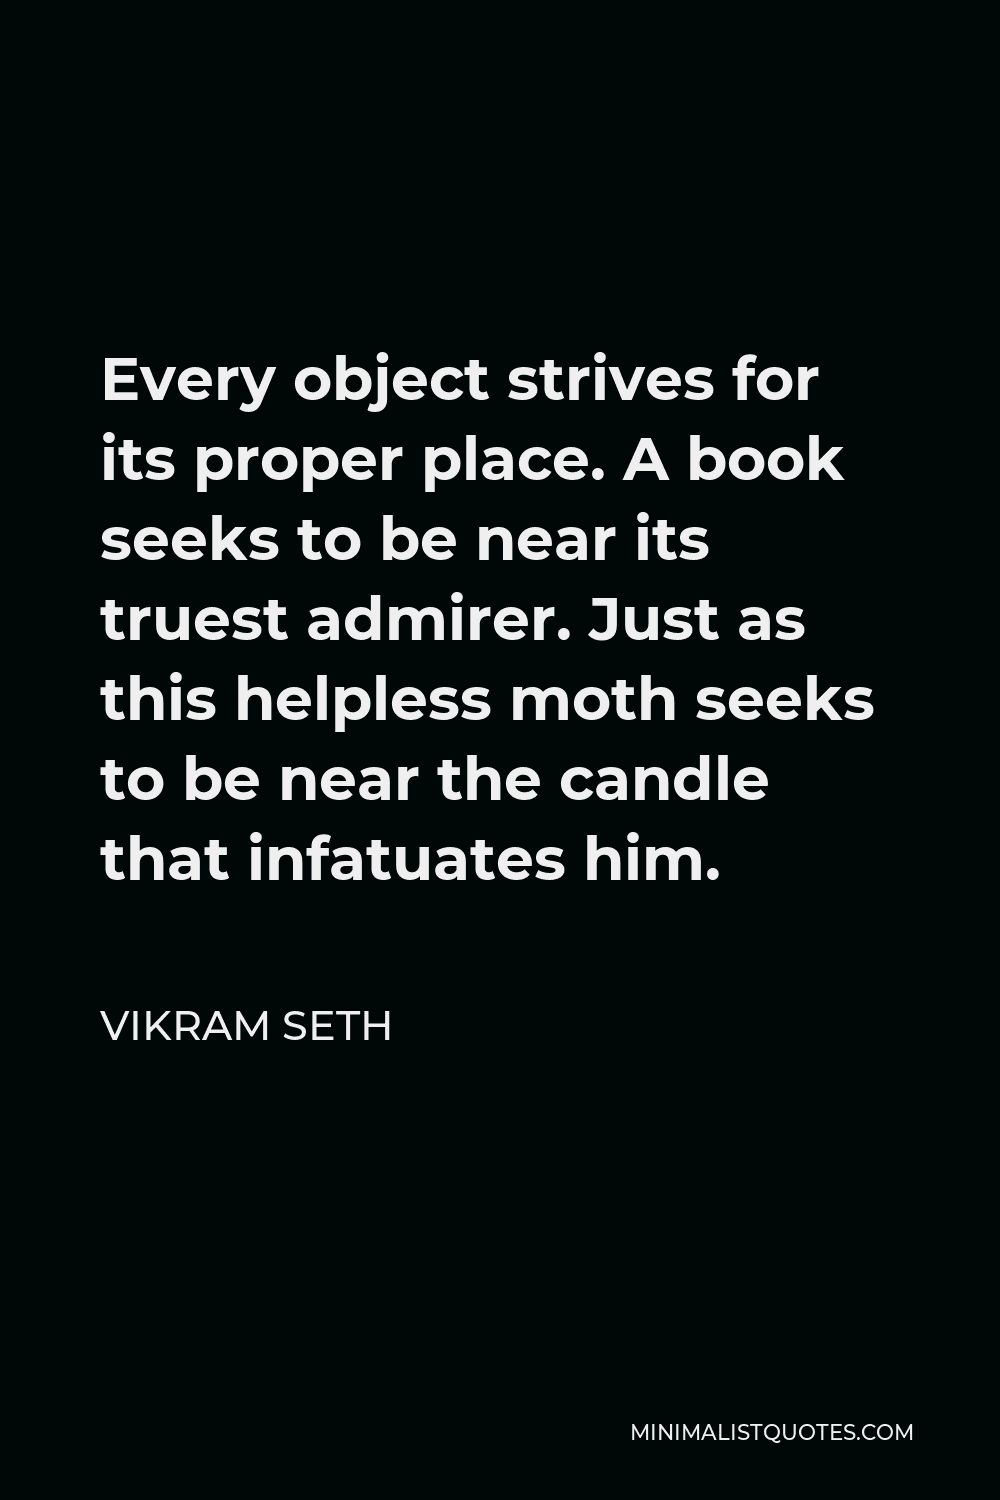 Vikram Seth Quote - Every object strives for its proper place. A book seeks to be near its truest admirer. Just as this helpless moth seeks to be near the candle that infatuates him.